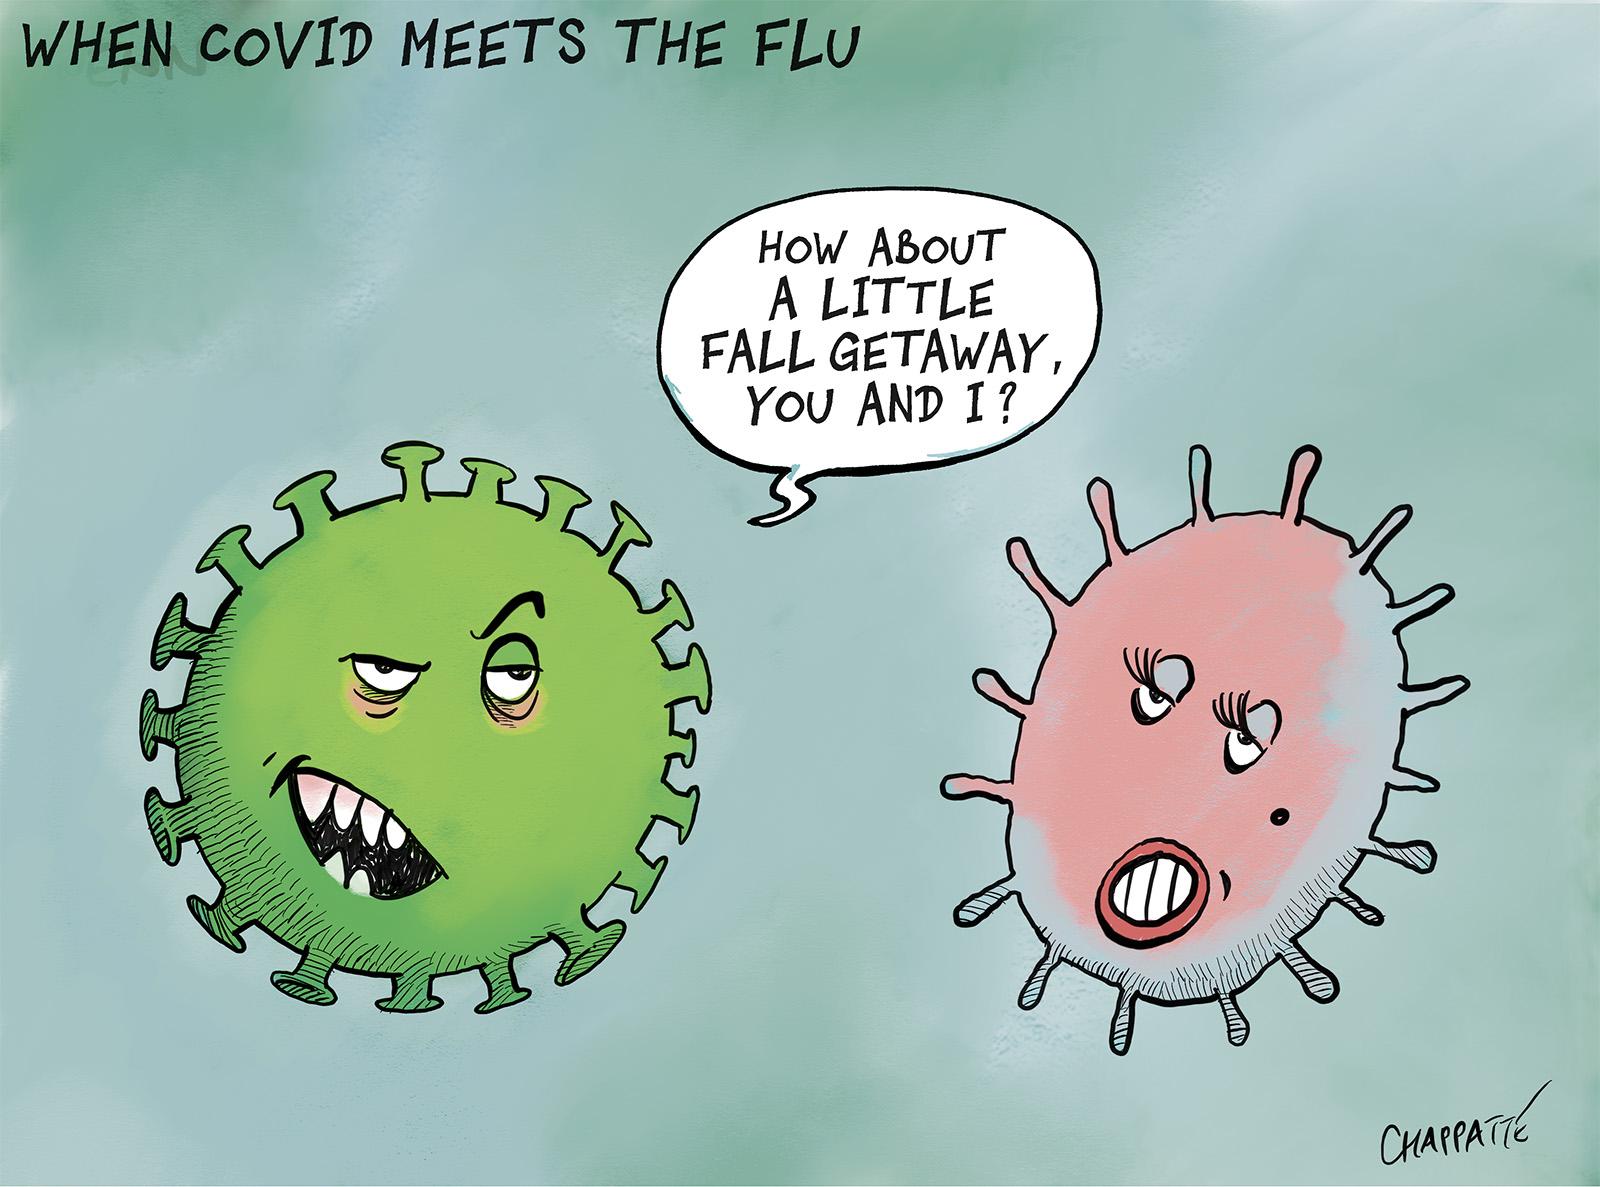 When Covid meets the flu